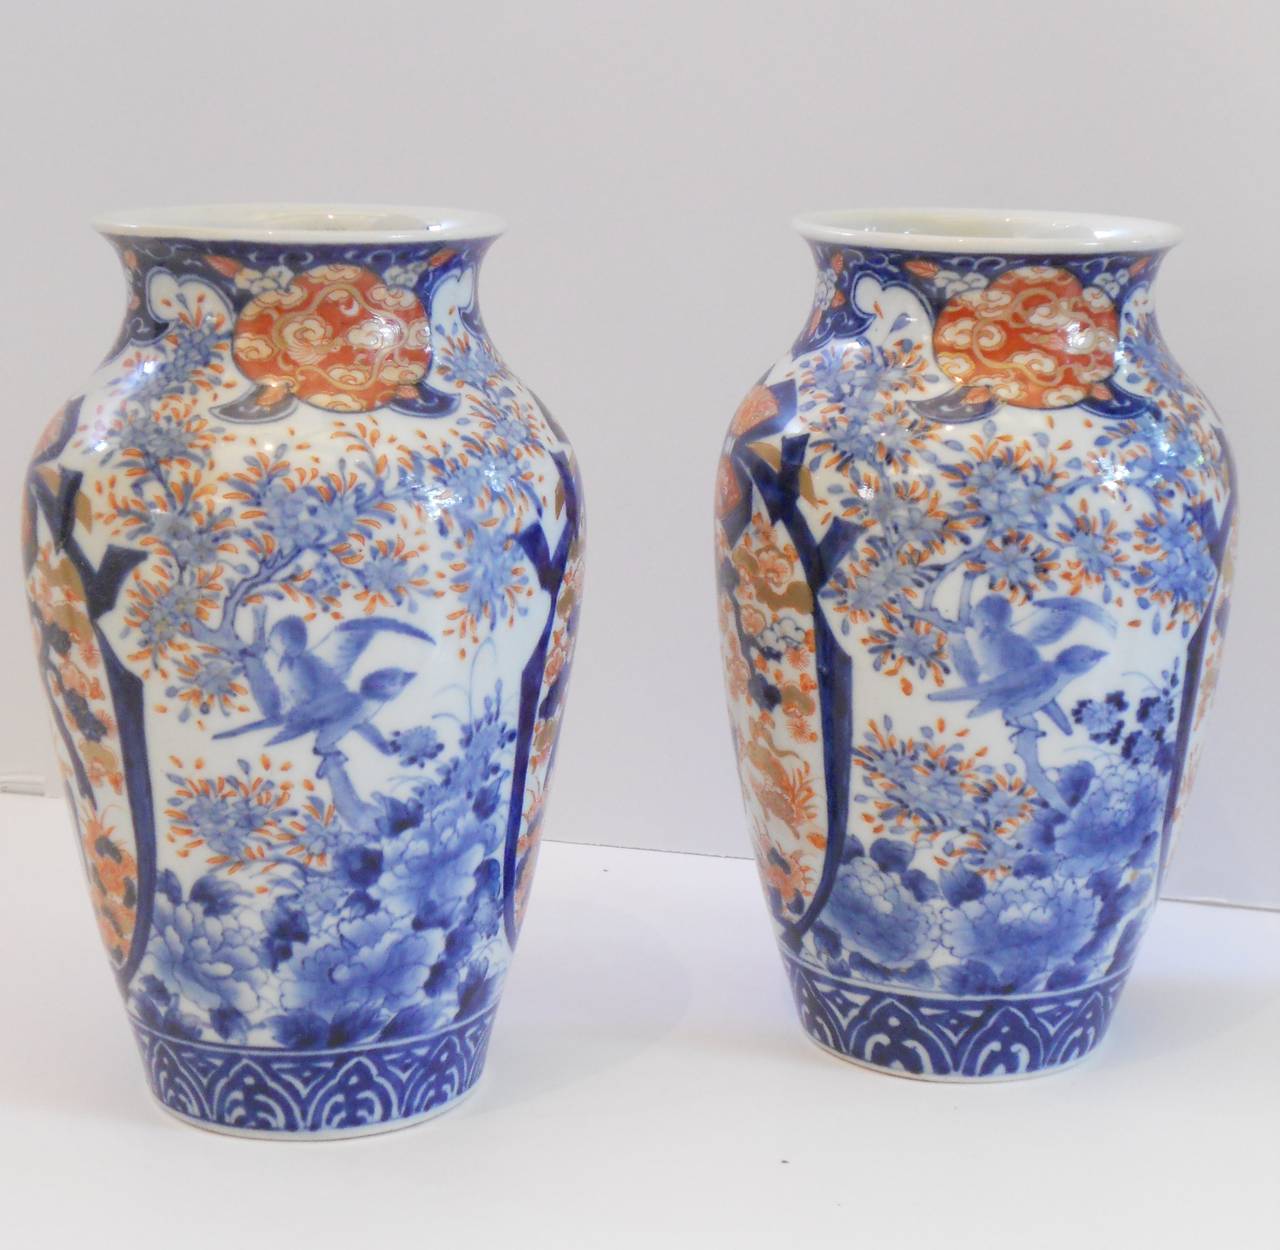 Pair of signed Imari vases of balust form with brilliant blue and red coloration. 
Symbols inside the cartouche include pine which is the symbol of everlasting strength and ability to endure and an incense burner symbolizing veneration of the